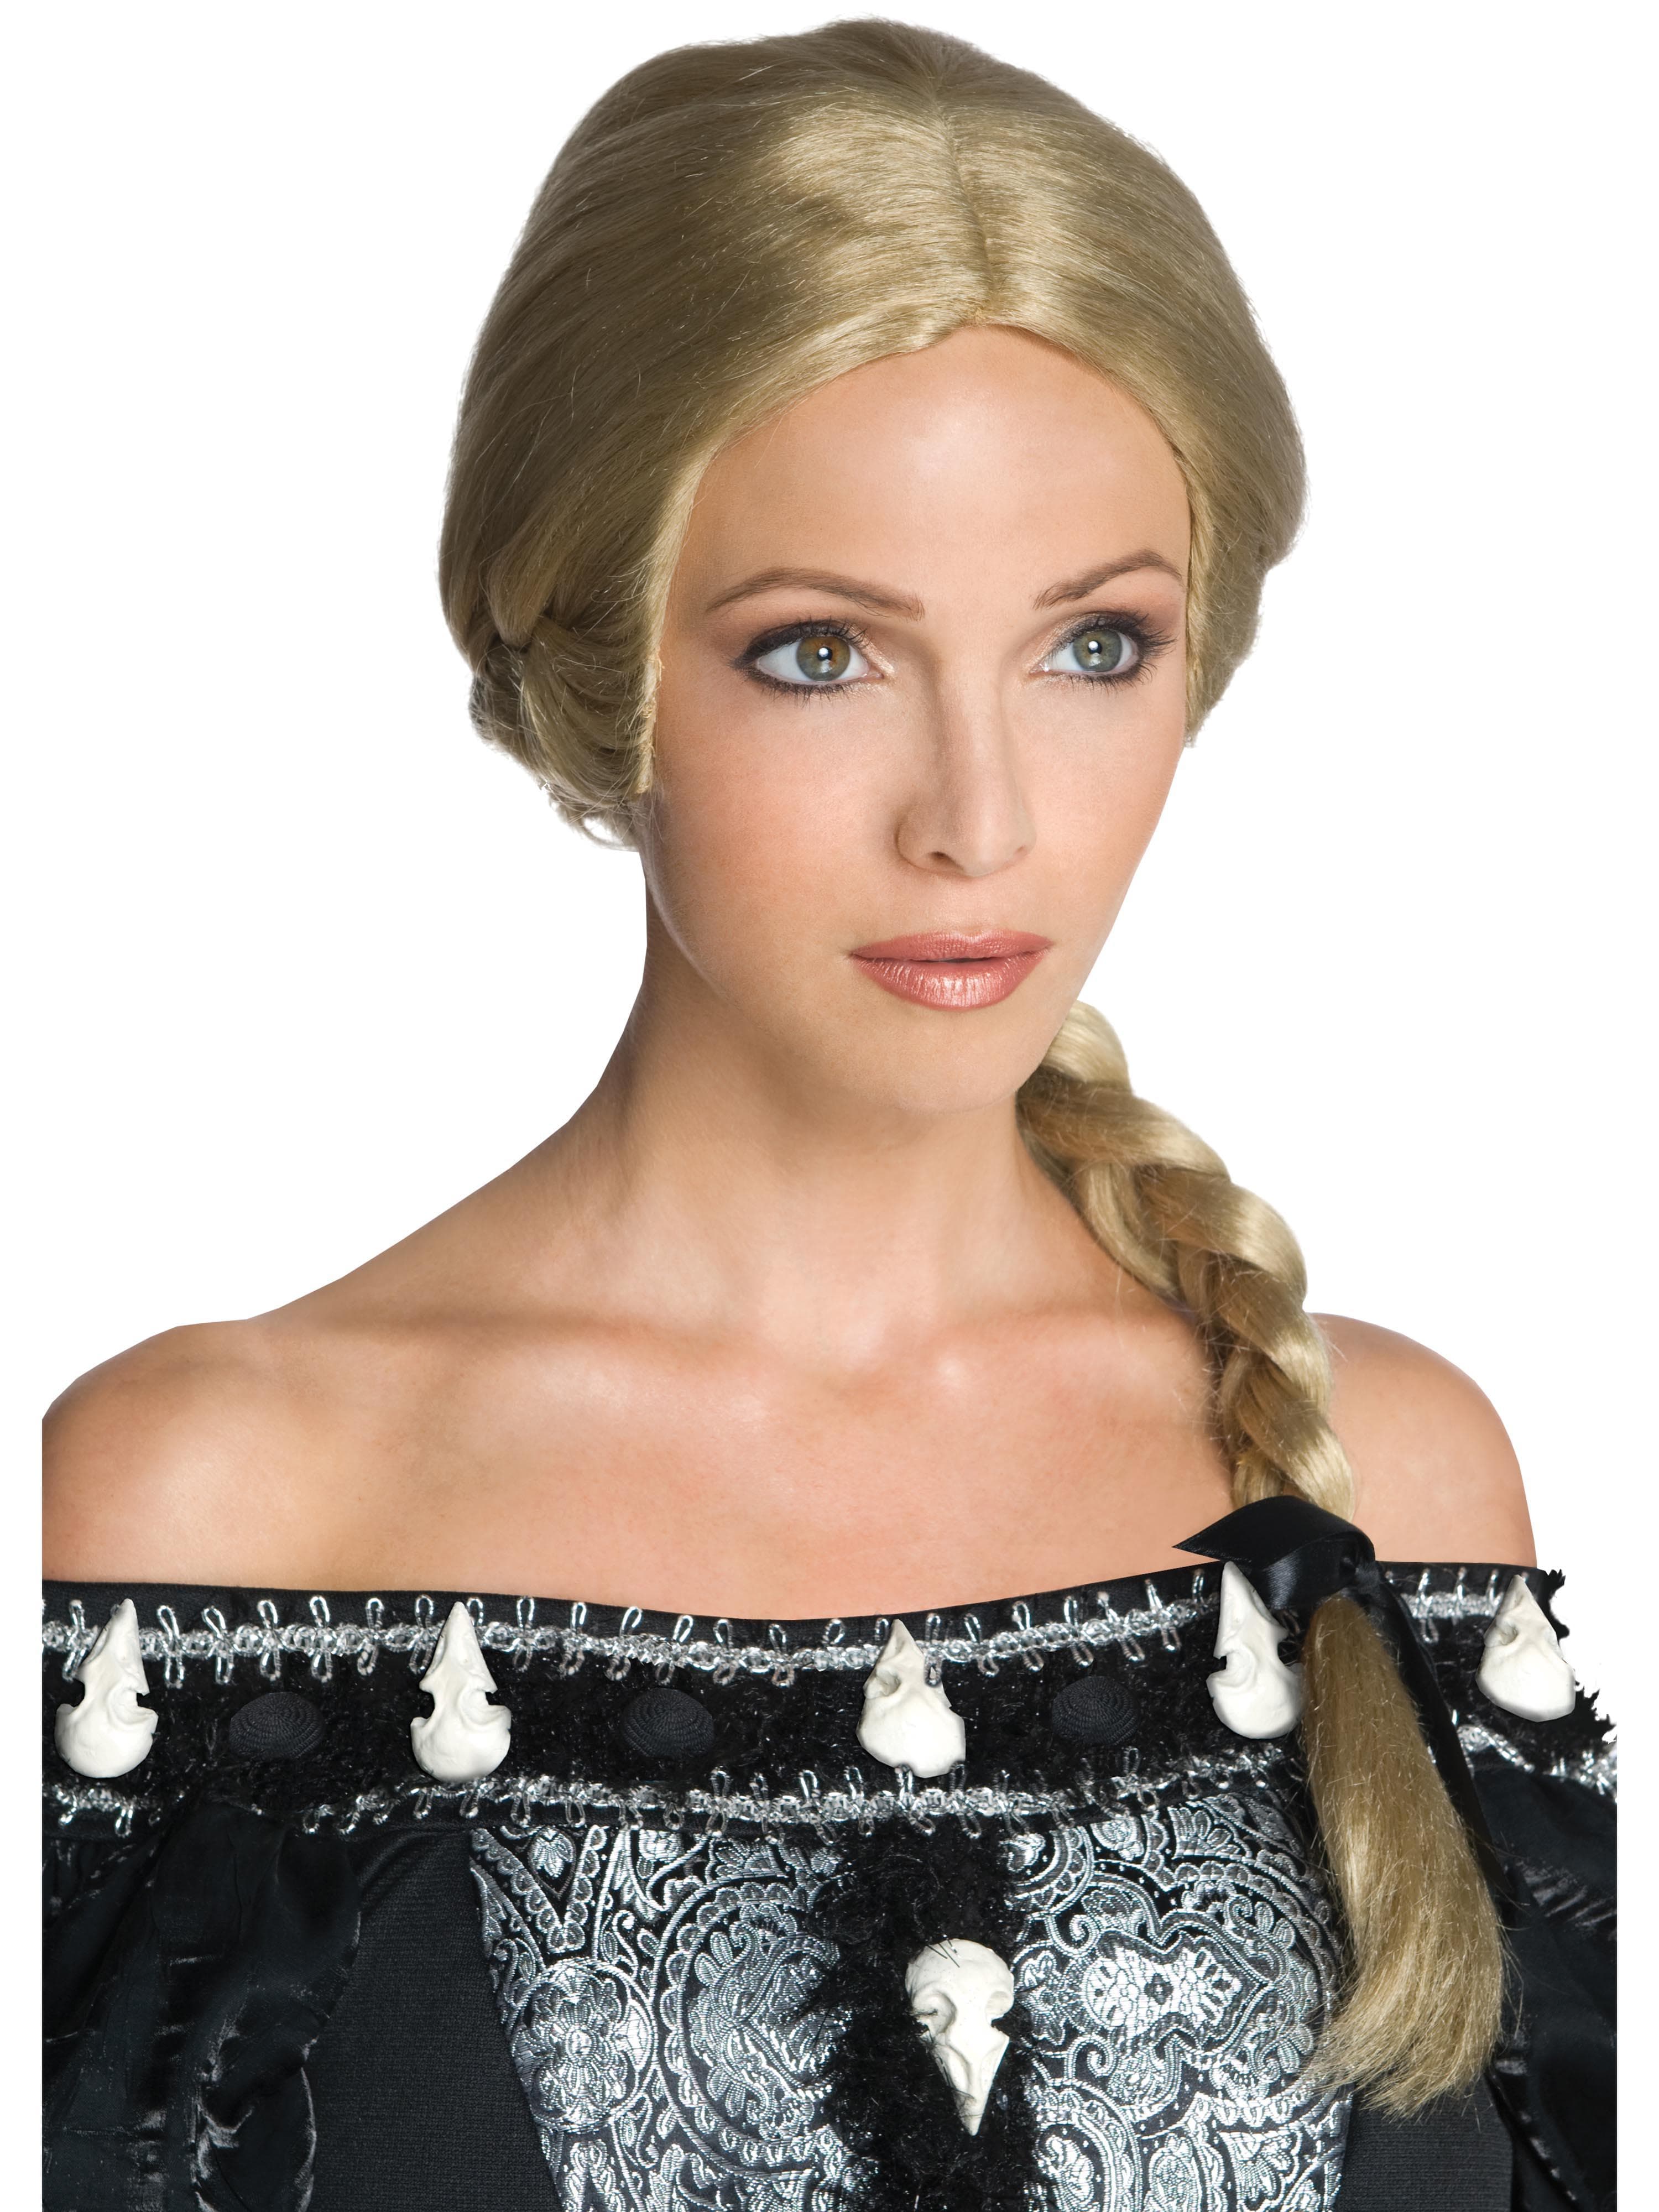 Women's Snow White and the Huntsman Ravenna's Blonde Braided Wig - costumes.com